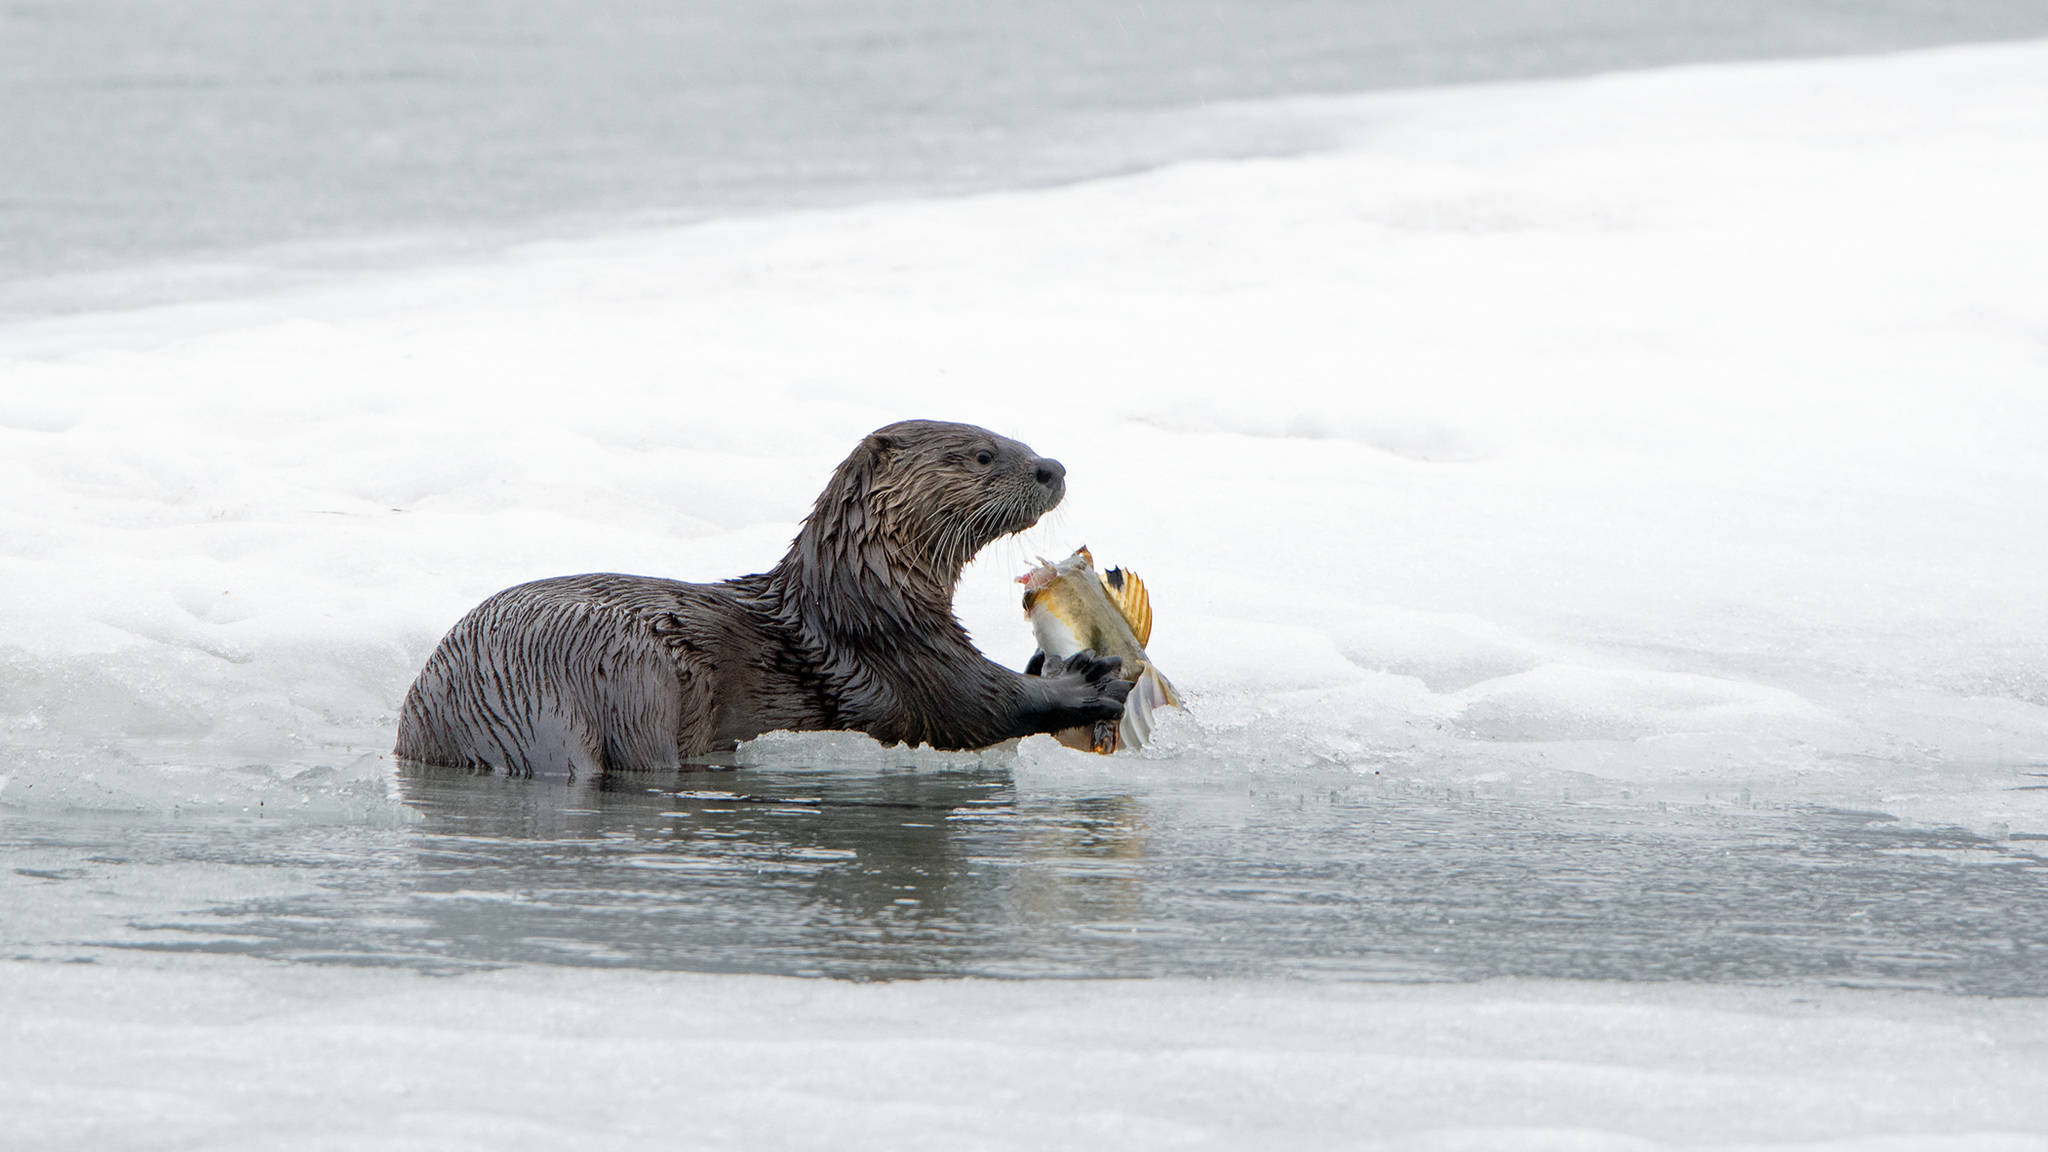 A river otter munched on a sculpin, just before a thieving eagle snatched it from the otter’s grip. (Photo by Jos Bakker)